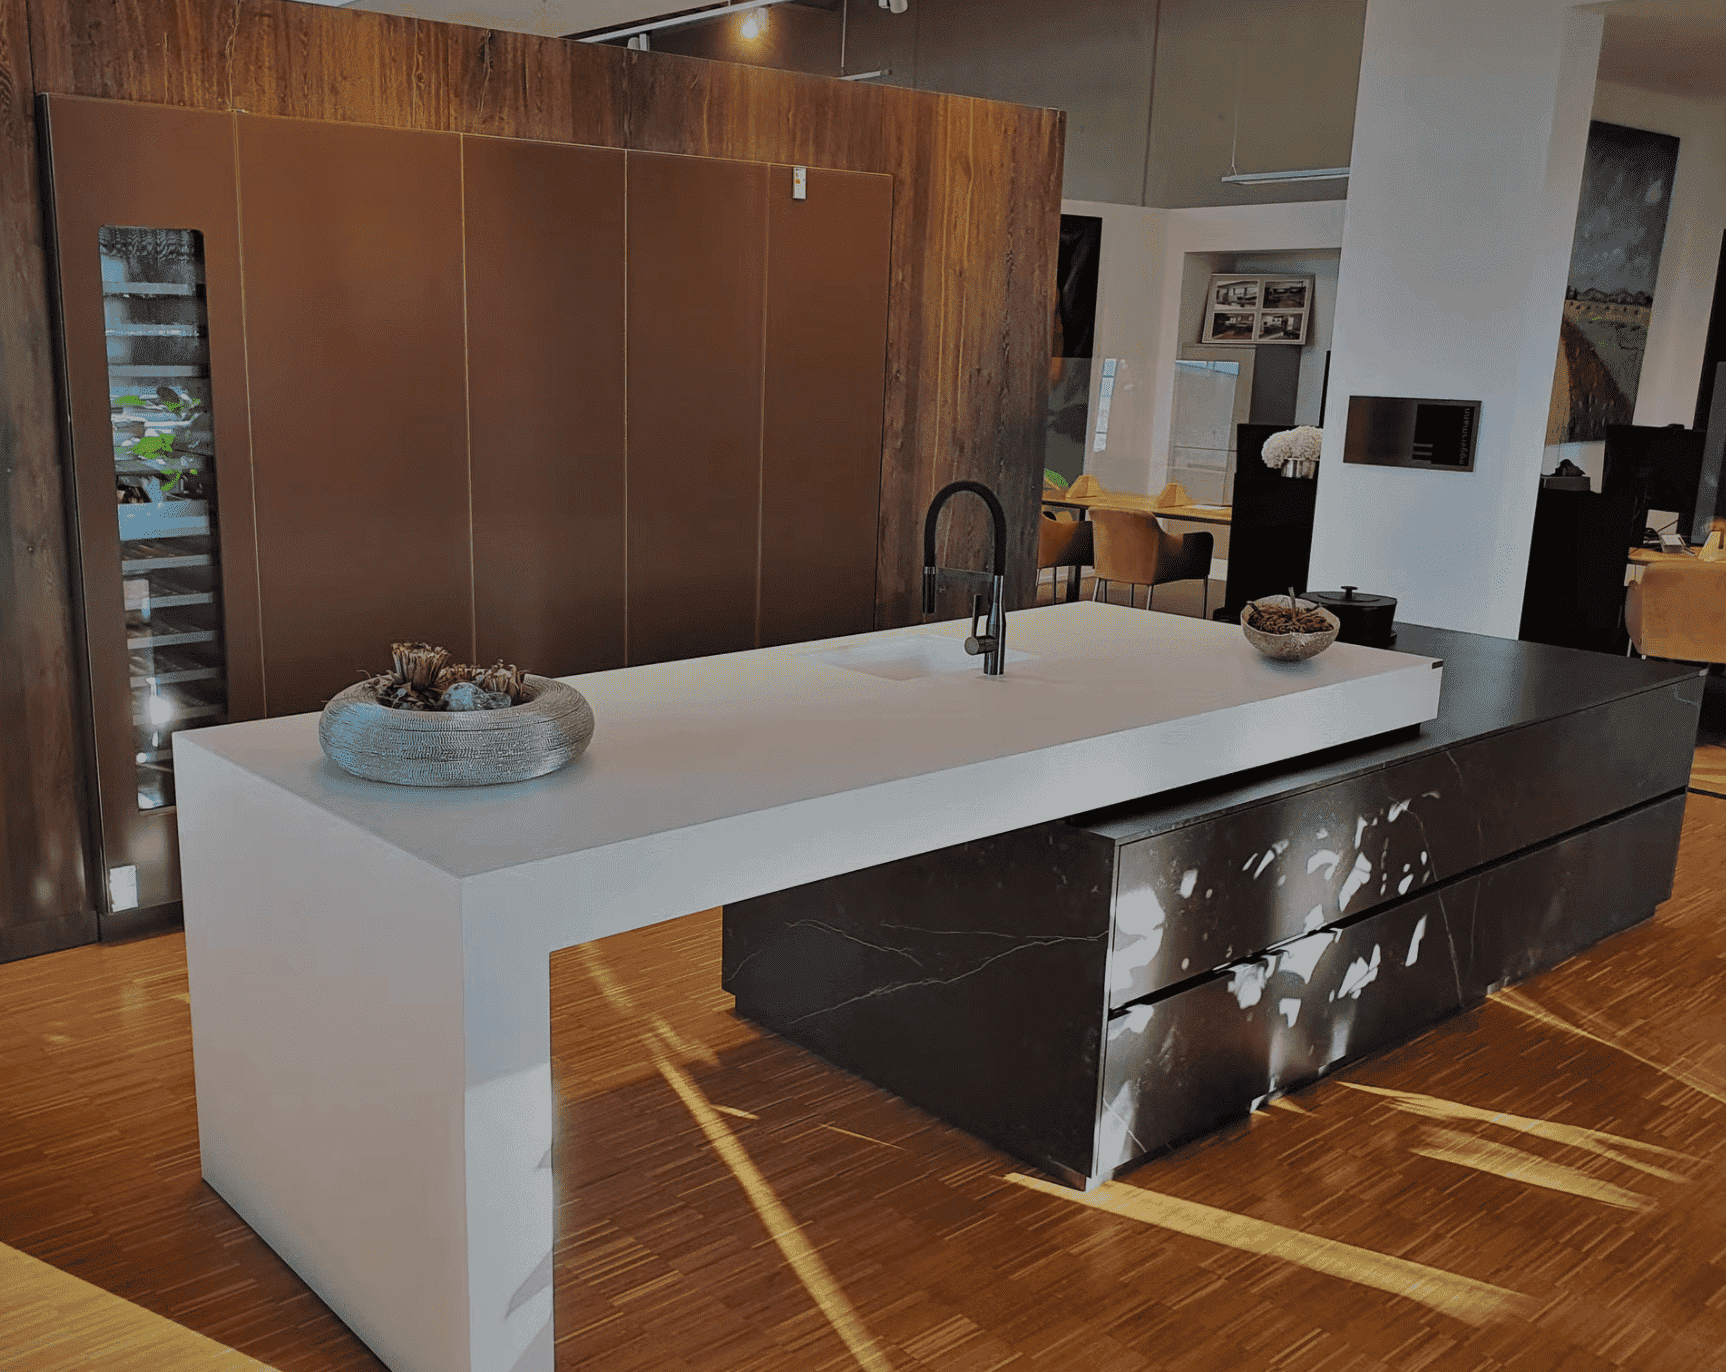 Color of Kitchen Countertops – Dark or Light